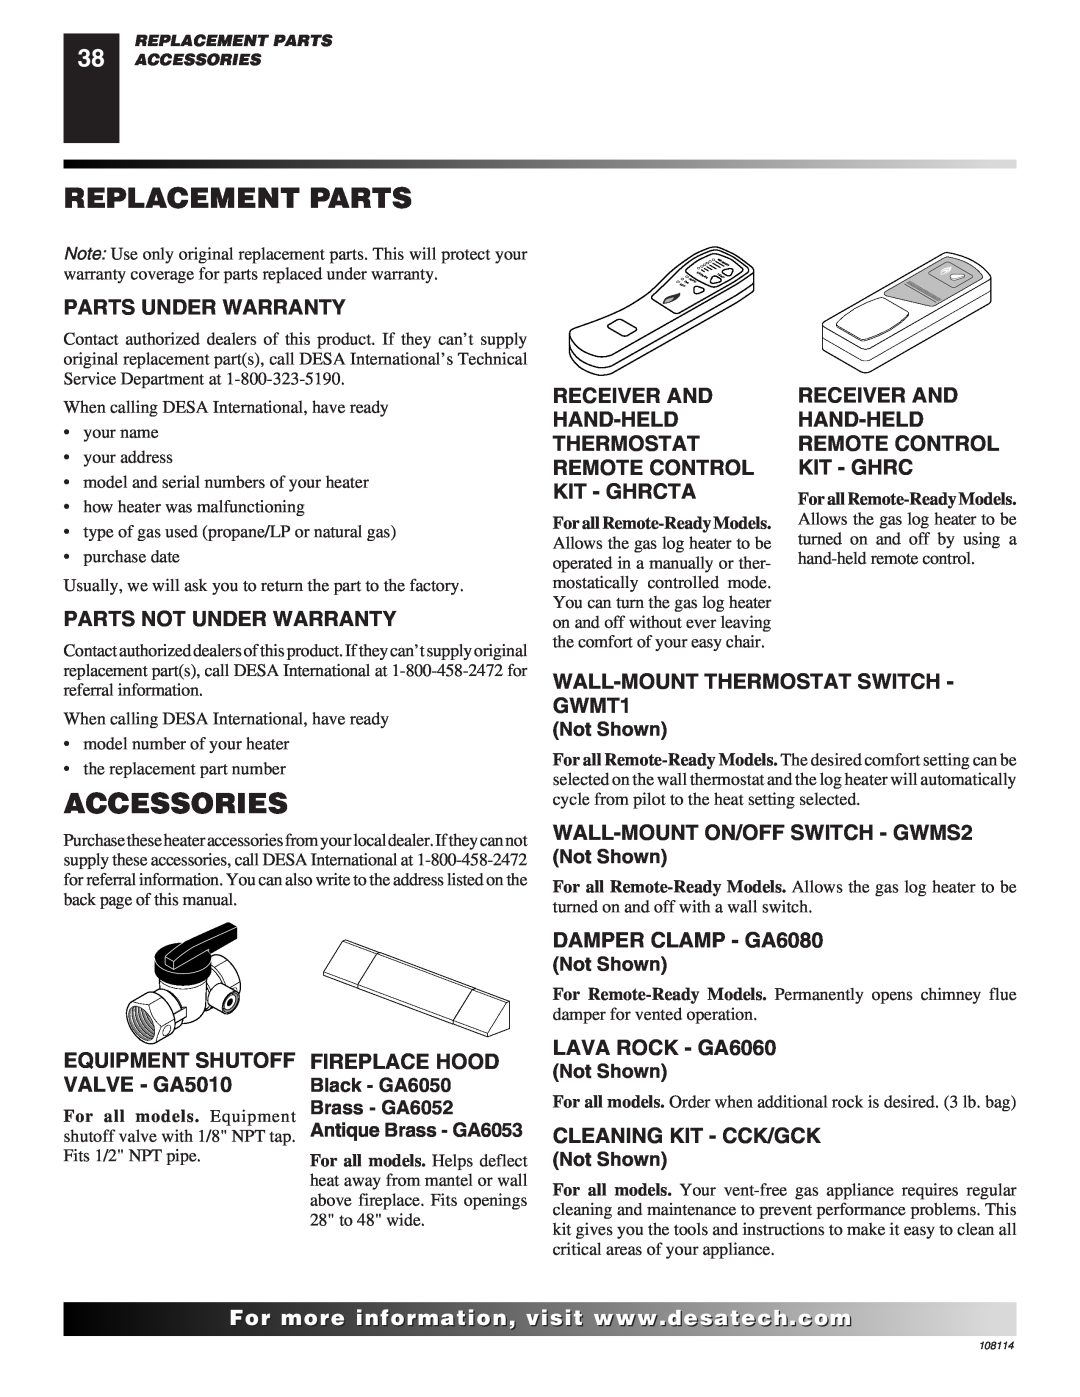 Desa INTERNATIONAL UNVENTED (VENT-FREE) GAS LOG HEATER installation manual Replacement Parts, Accessories 